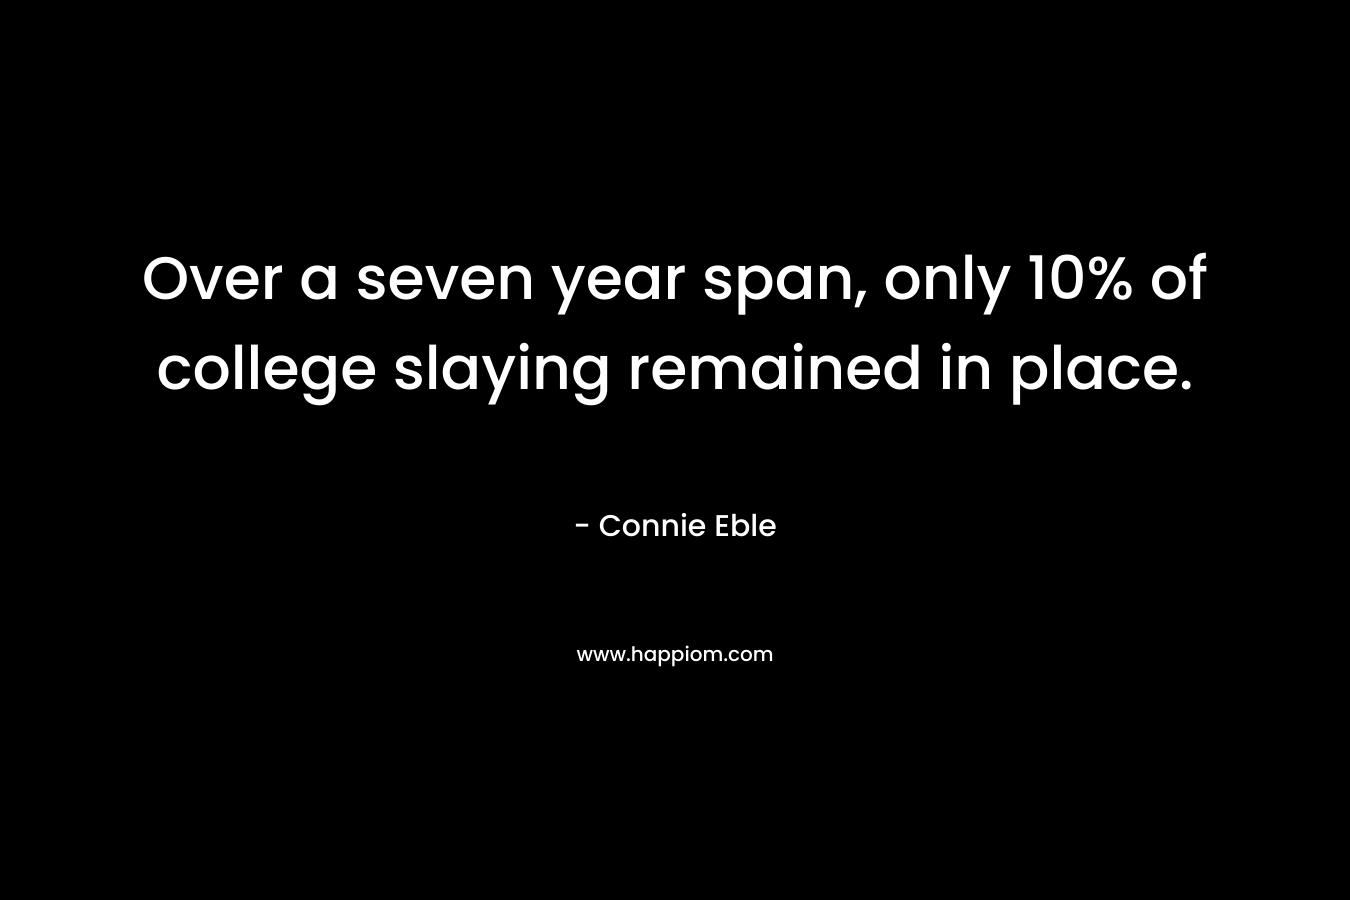 Over a seven year span, only 10% of college slaying remained in place. – Connie Eble